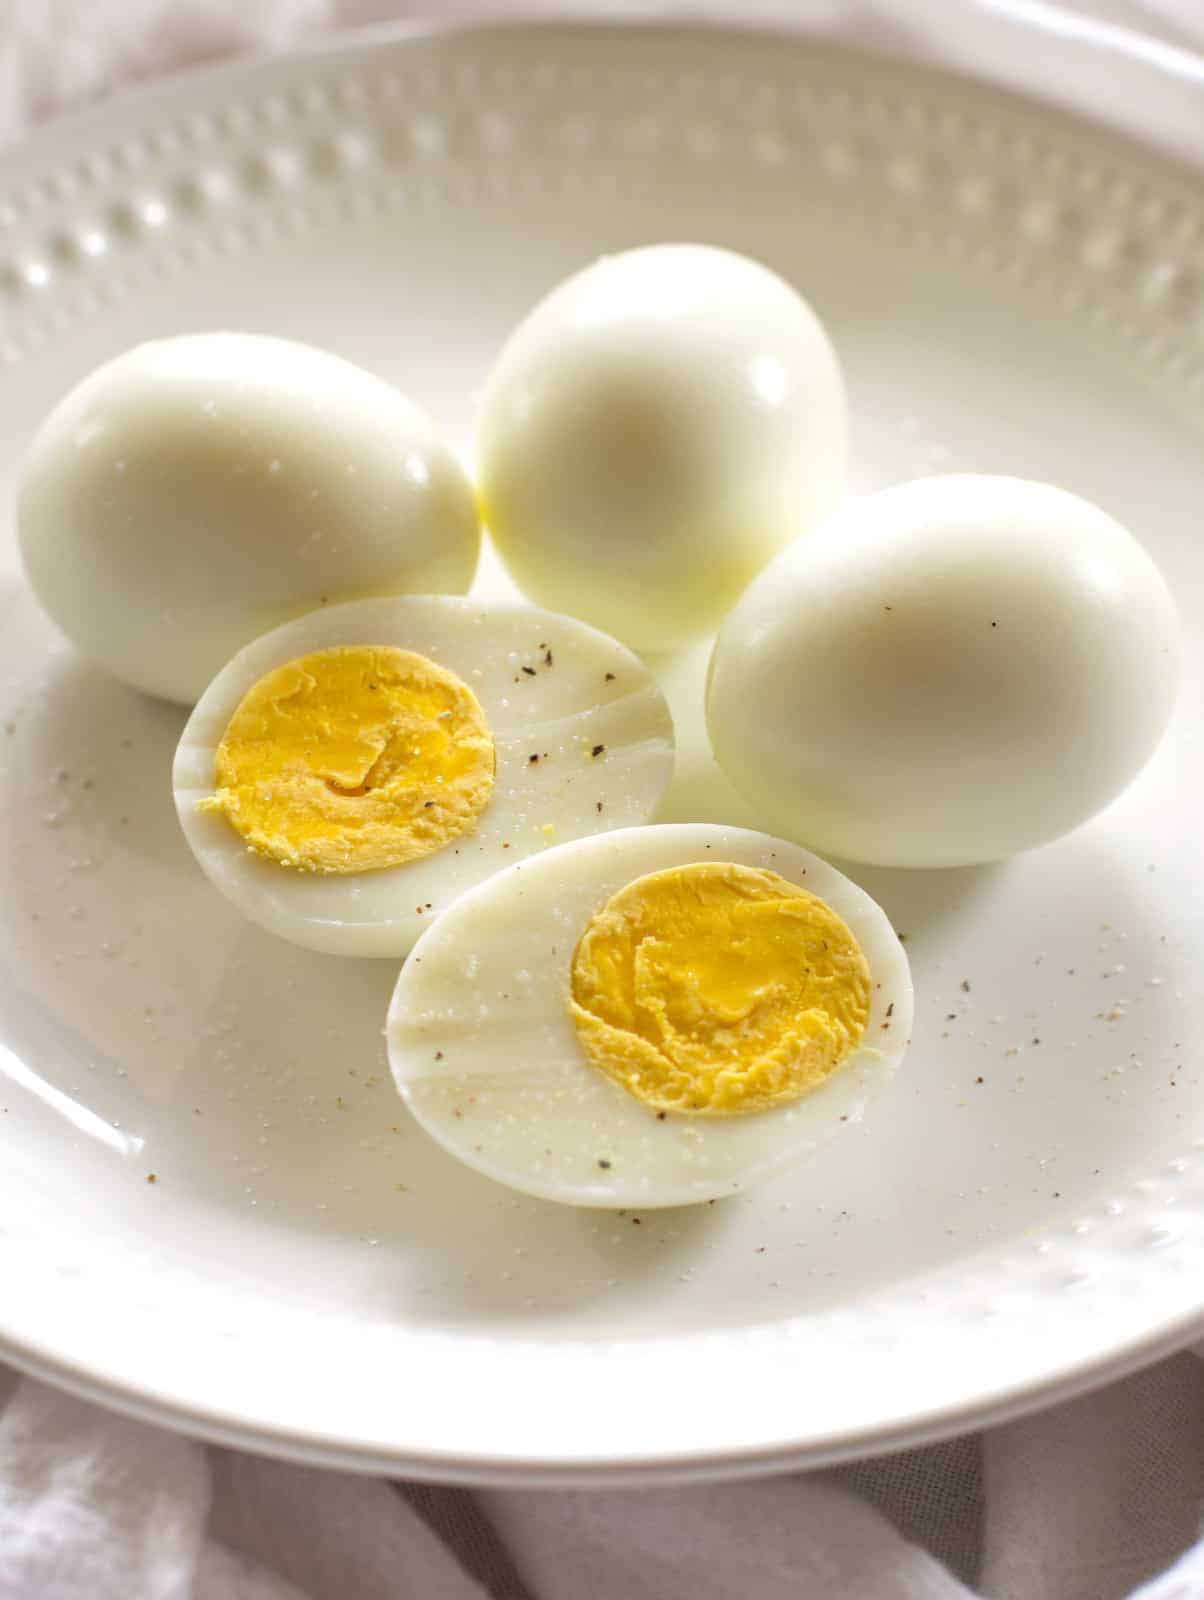 Handschrift Kenia Stoffig How to Make Perfect Hard Boiled Eggs - The Girl Who Ate Everything